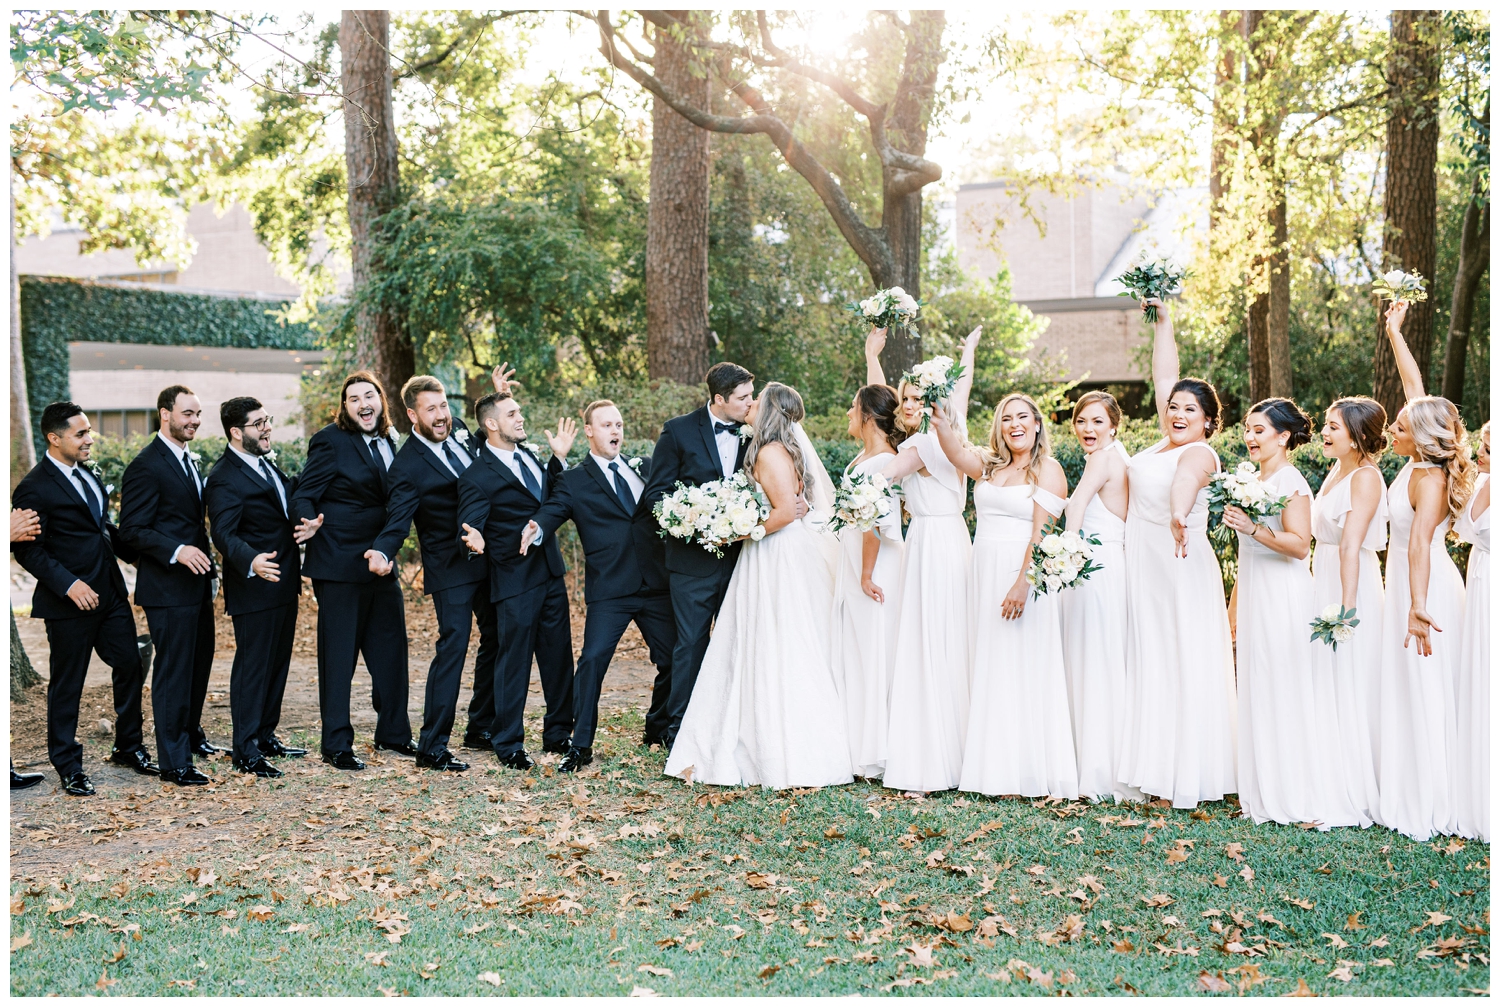 bridal party dressed in black and white on the lawn at the Houstonian Hotel wedding